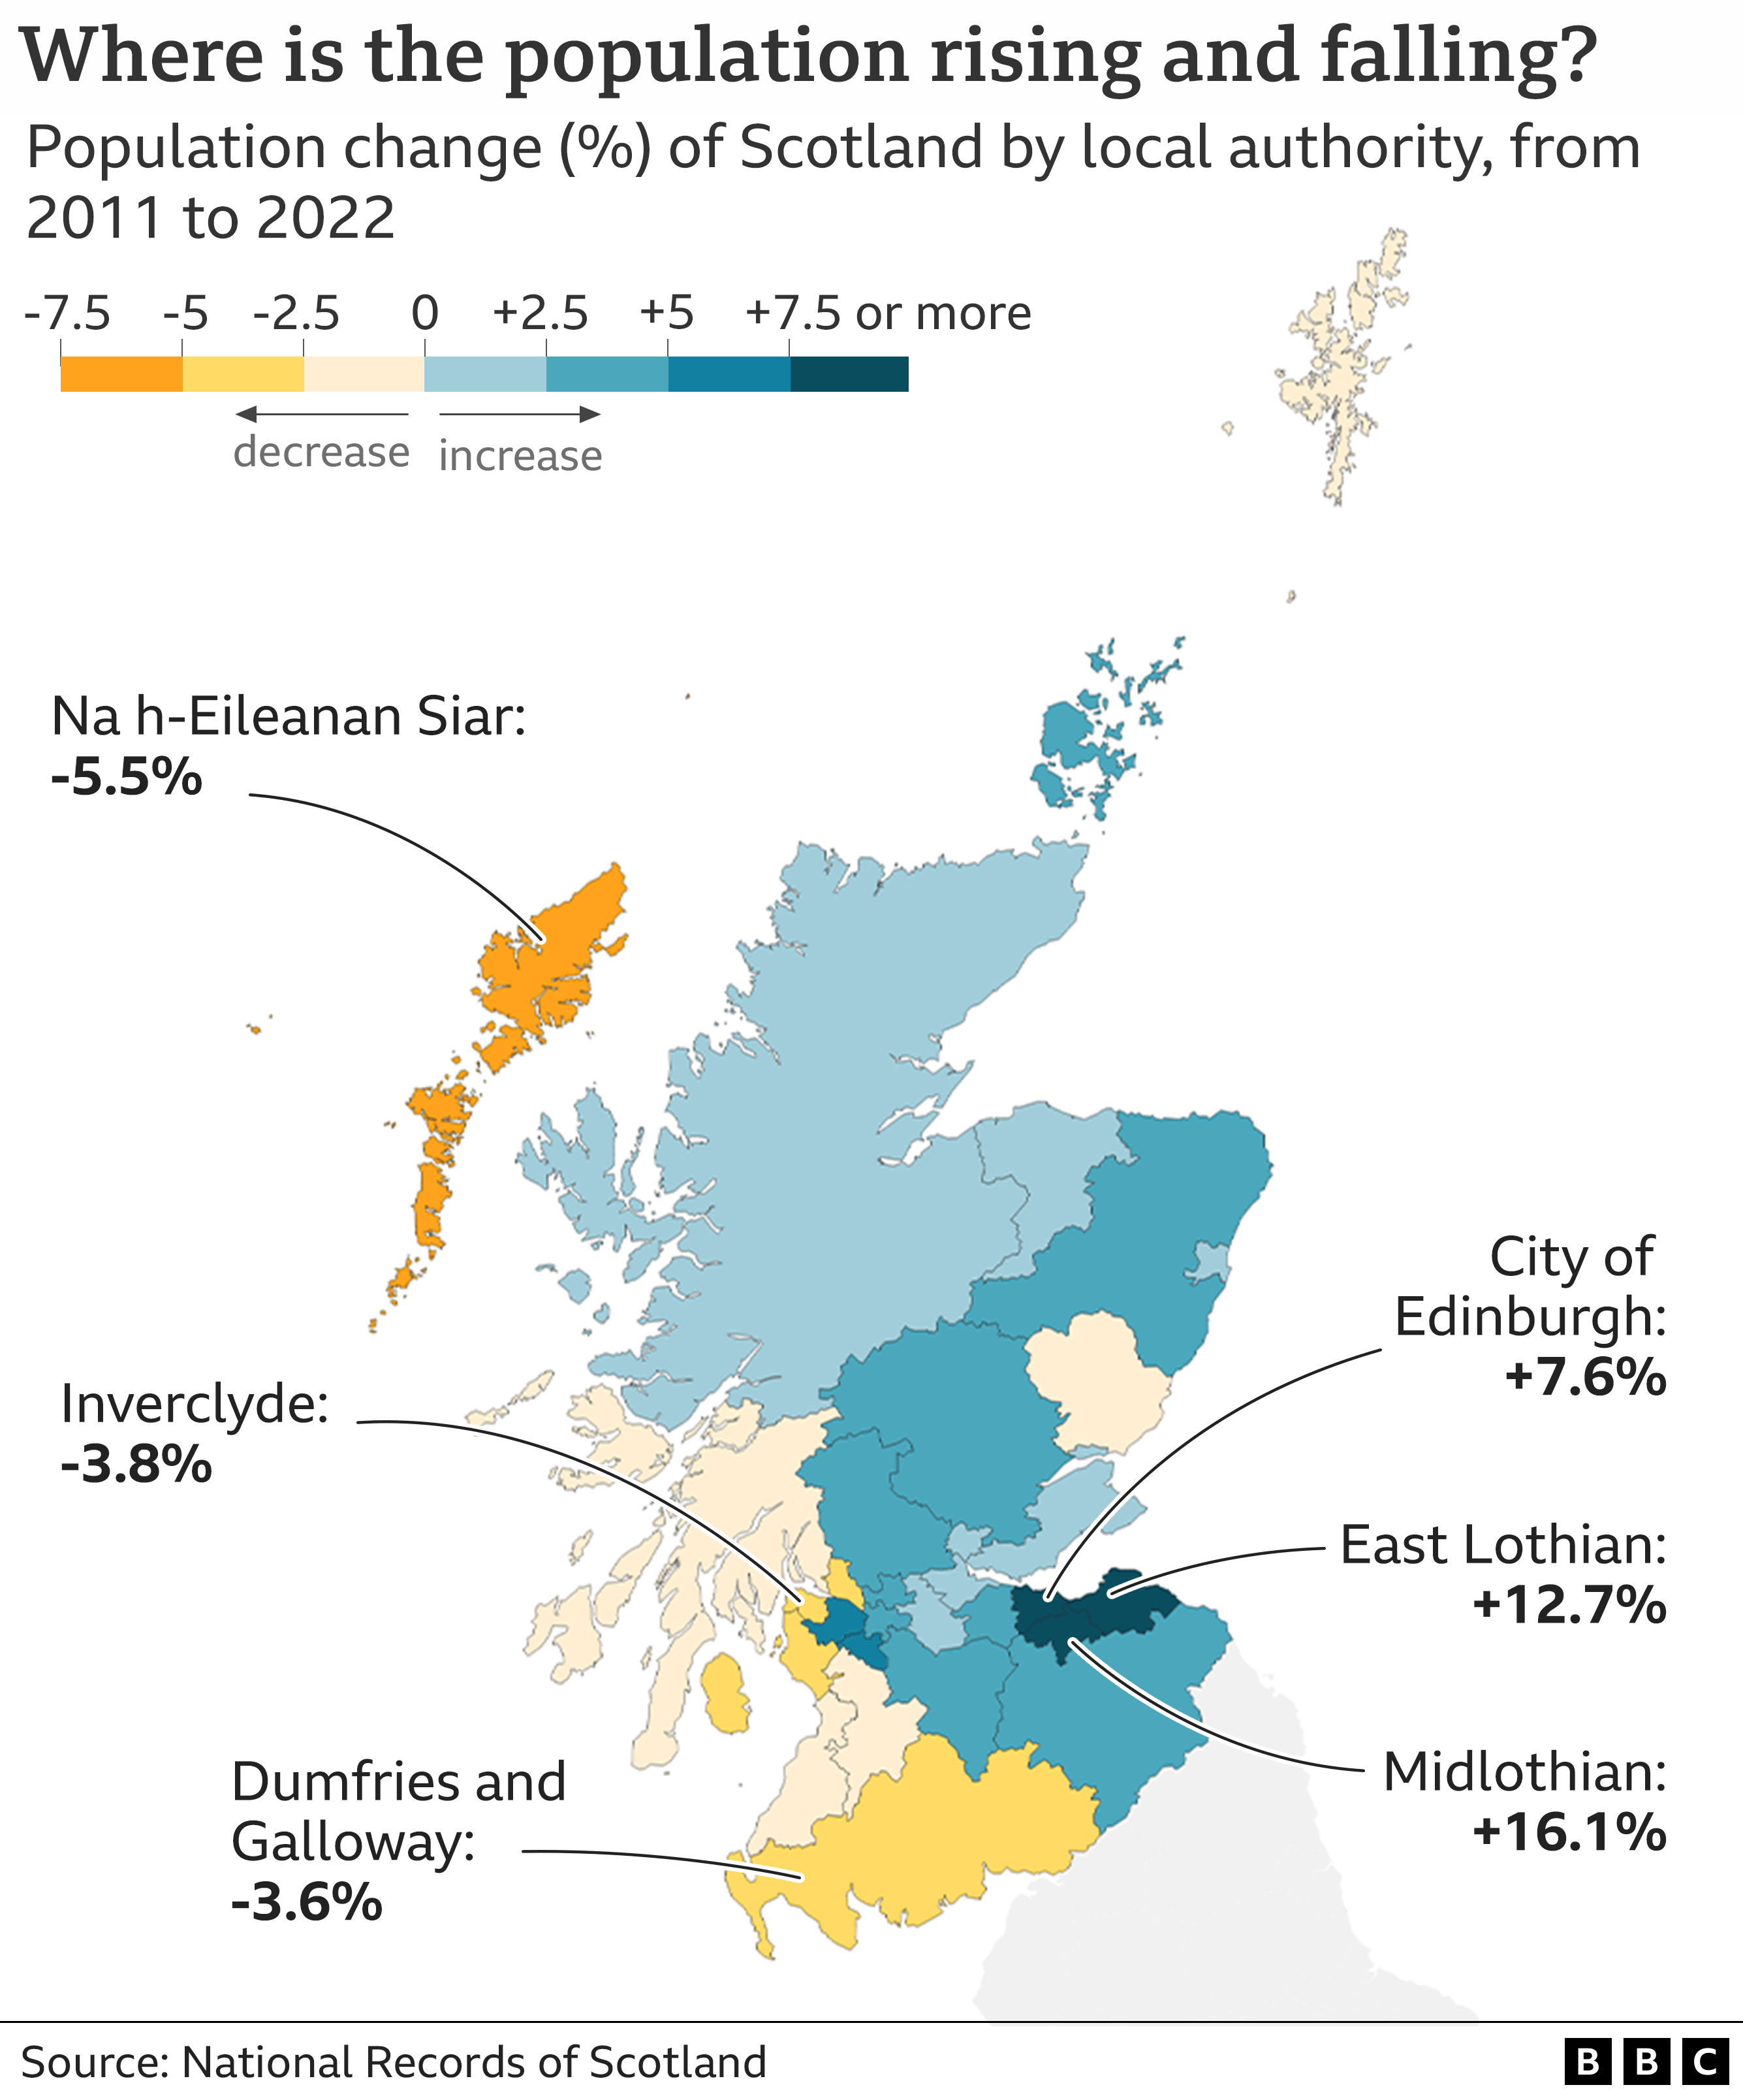 Map of Scotland showing population change between 2011 and 2022 census by local authority. Areas with the highest population increase were Midlothian, +16.1%; East Lothian, +12.7% and the City of Edinburgh, +7.6% . Areas where the population decreased most were Na h-Eileanan Siar, -5.5%; Inverclyde, -3.8% and Dumfries and Galloway, -3.6%.